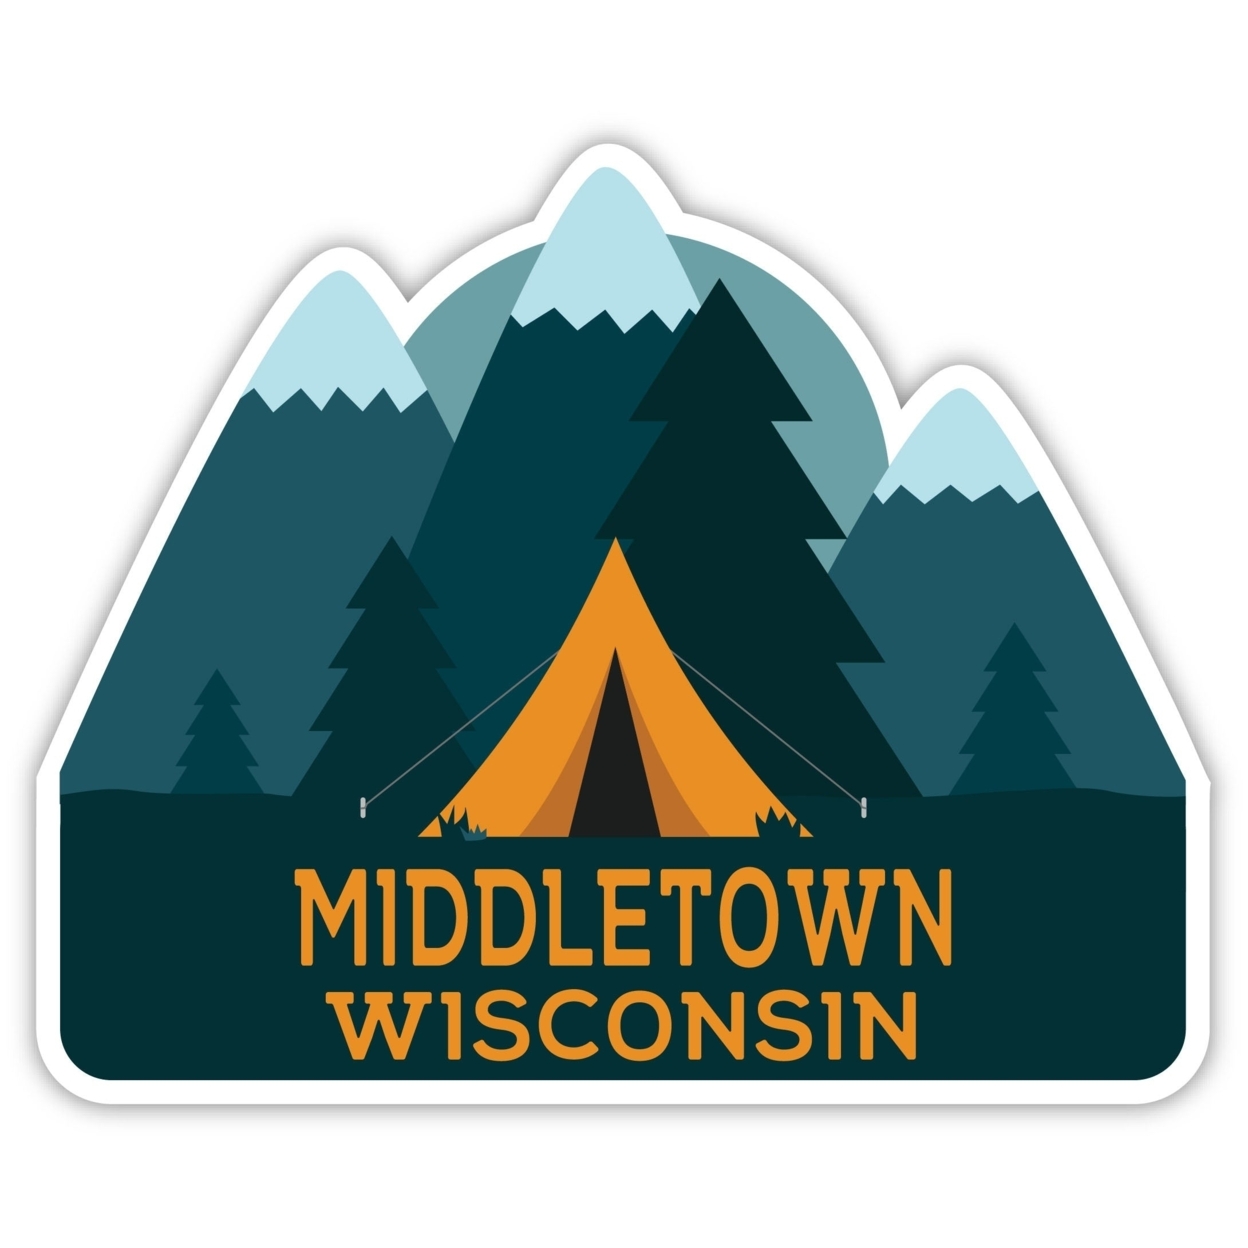 Middletown Wisconsin Souvenir Decorative Stickers (Choose Theme And Size) - 2-Inch, Tent